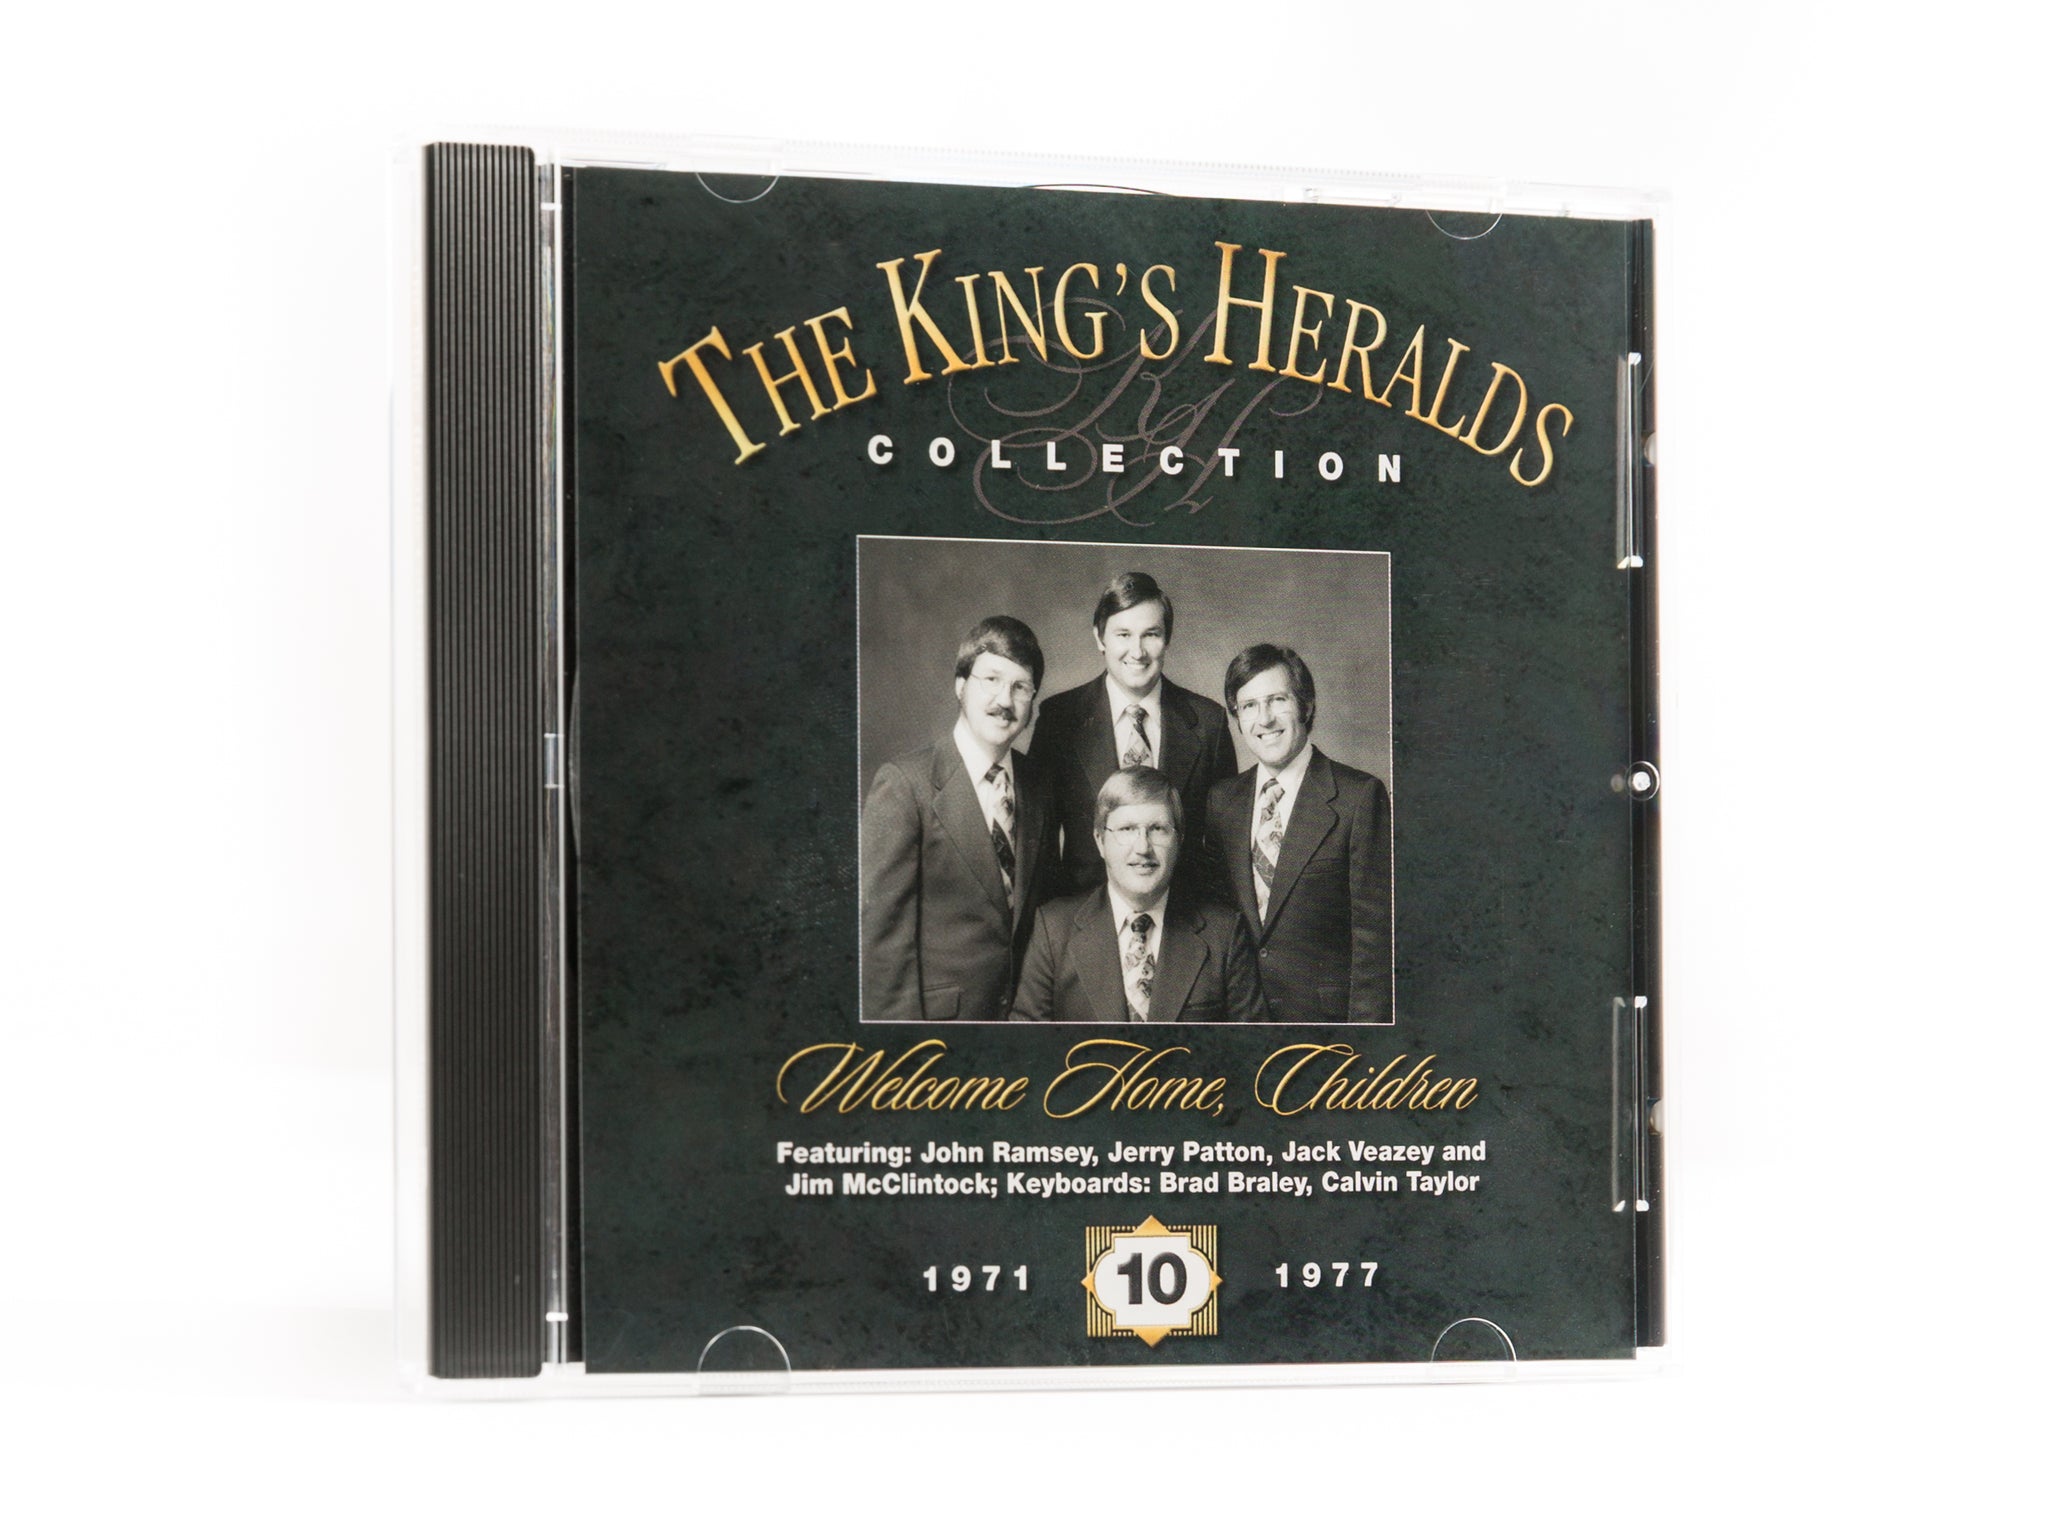 King's Heralds CD Collection - Vol. 10 - Welcome Home, Children